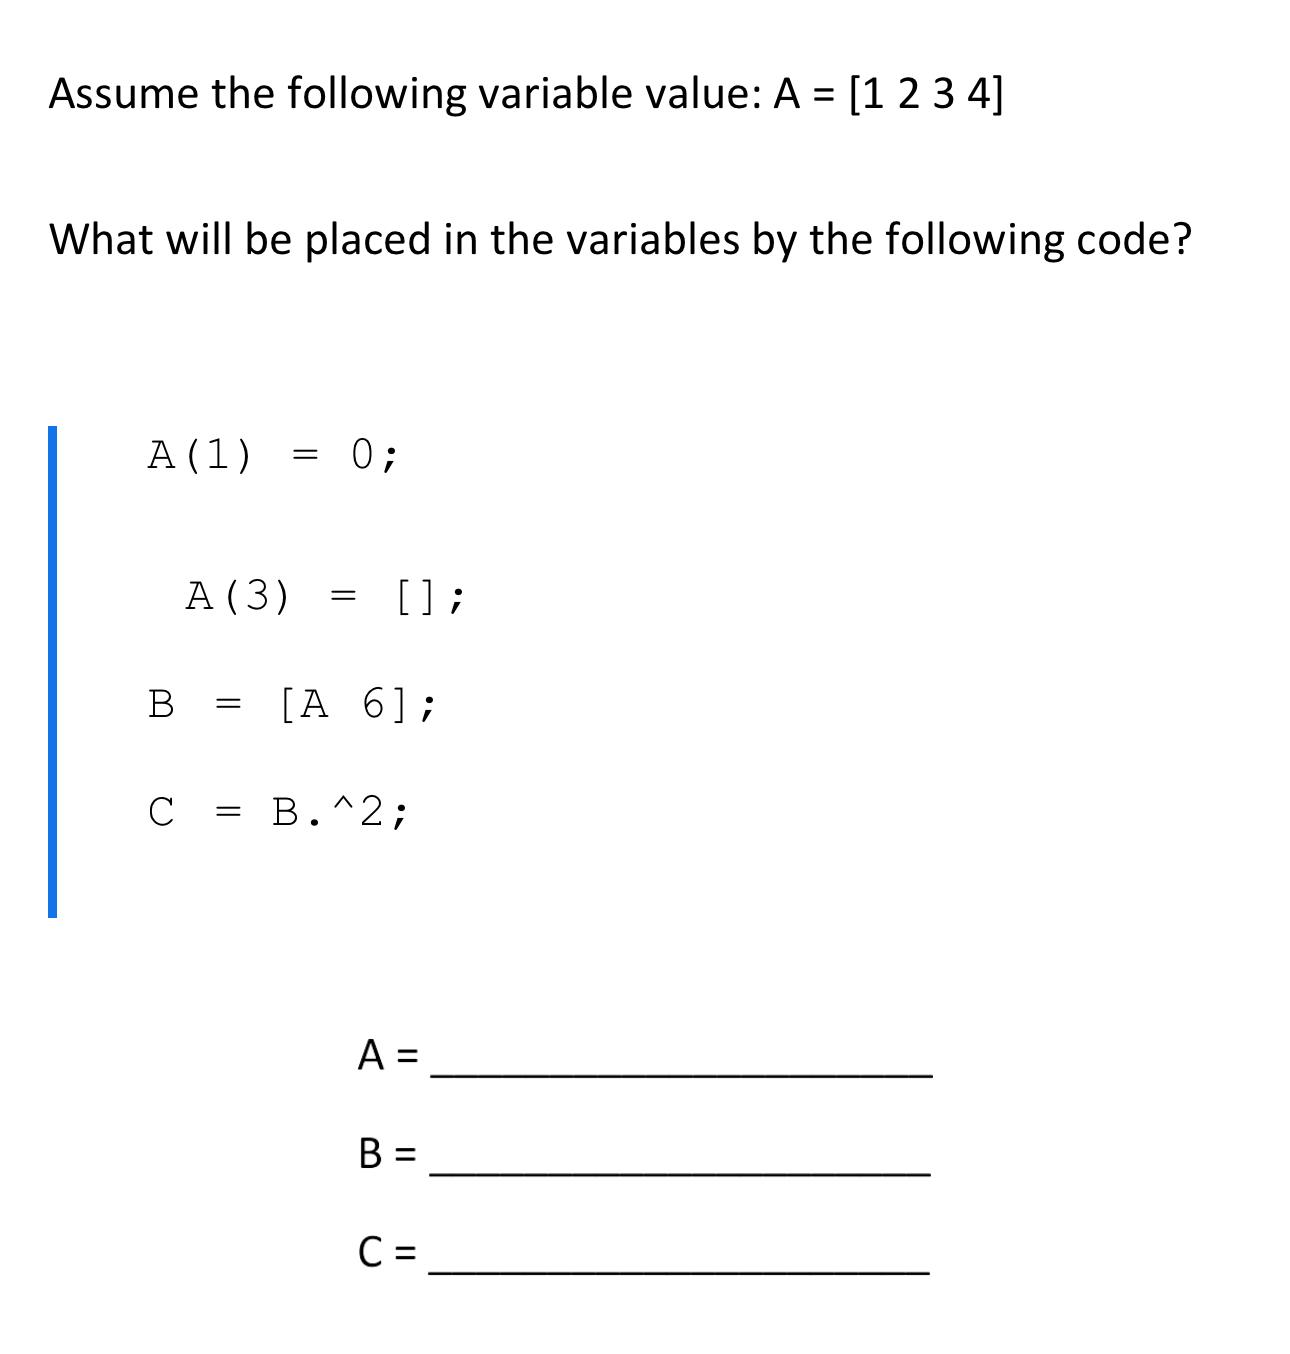 Assume the following variable value: A = [1 2 3 4] What will be placed in the variables by the following